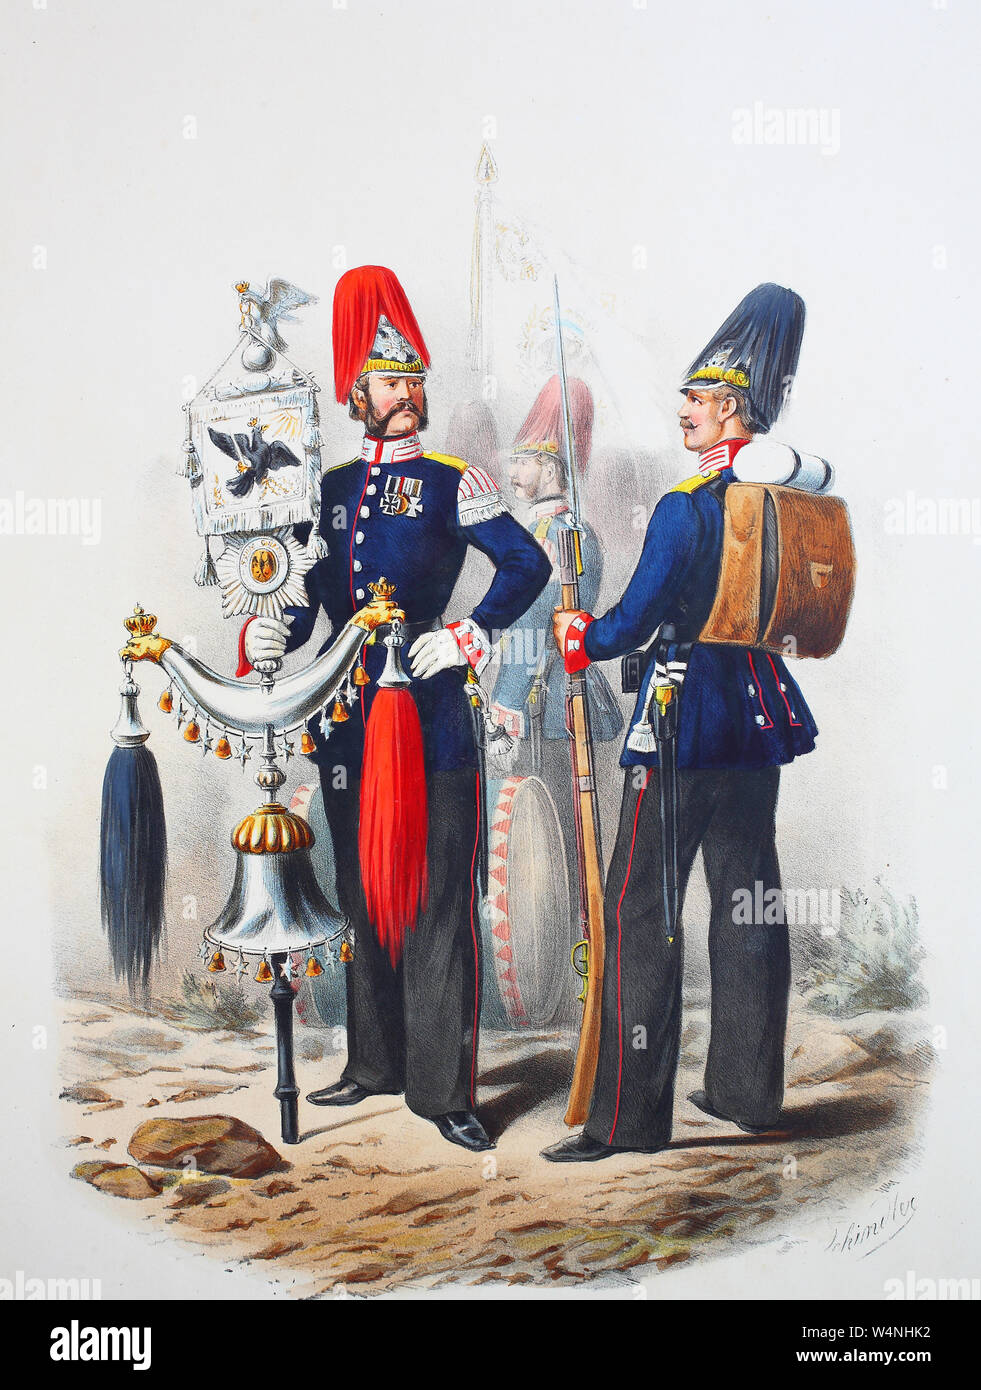 Royal Prussian Army, Guards Corps, Preußens Heer, preussische Garde, Garde Füsilier Regiment, Mohamedsfahne, Hauptboist, Füsilier, Digital improved reproduction of an illustration from the 19th century Stock Photo